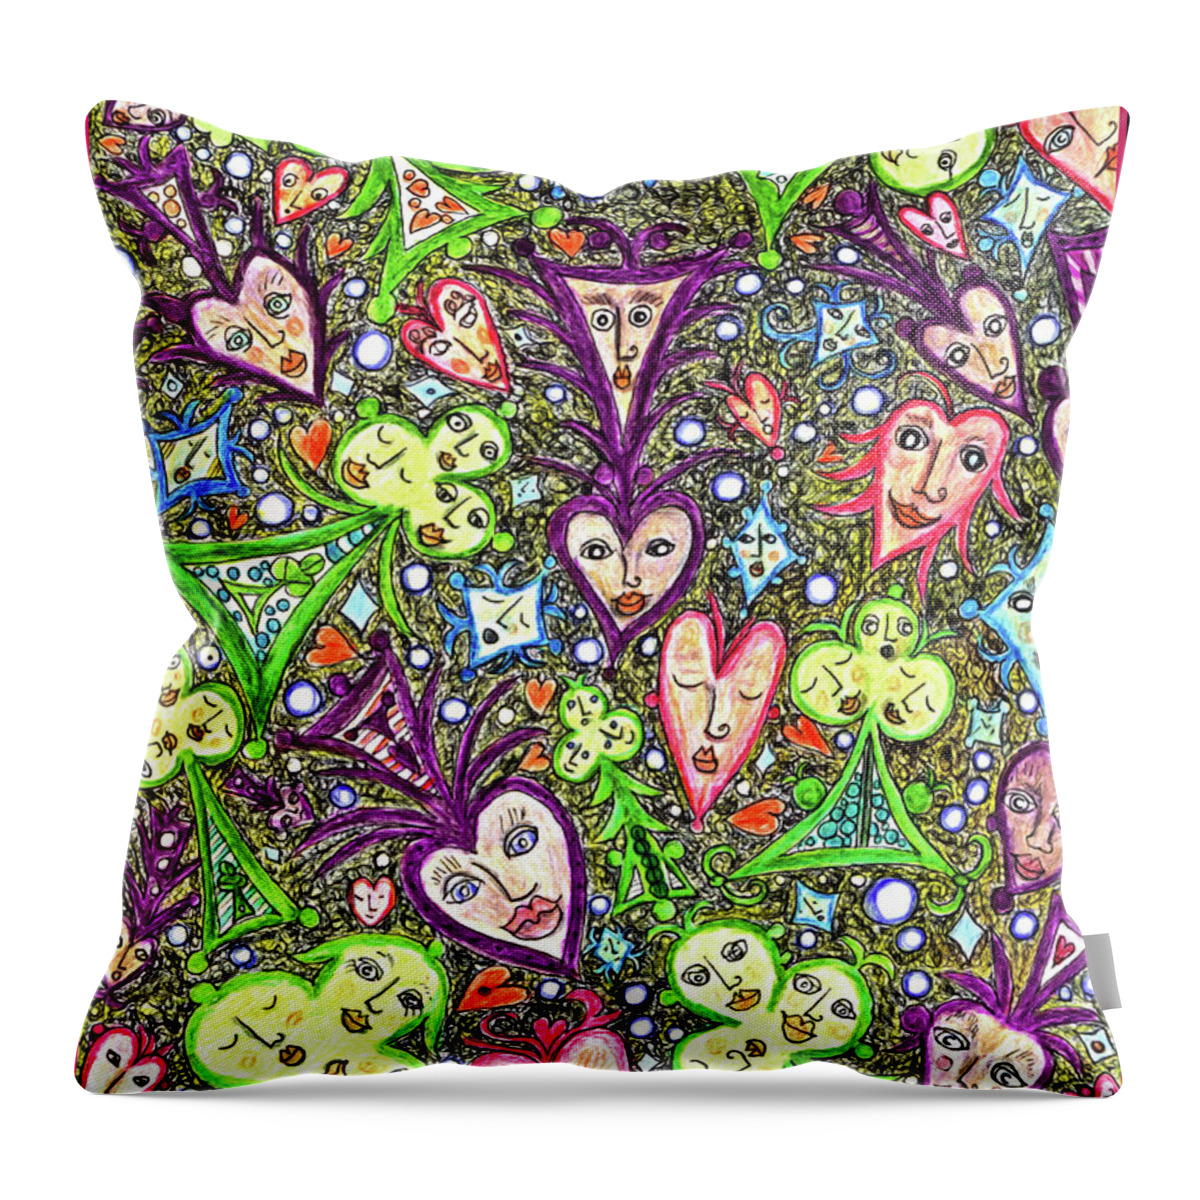 Lise Winne Throw Pillow featuring the painting Painting with Playing Card Symbols That Have Faces by Lise Winne